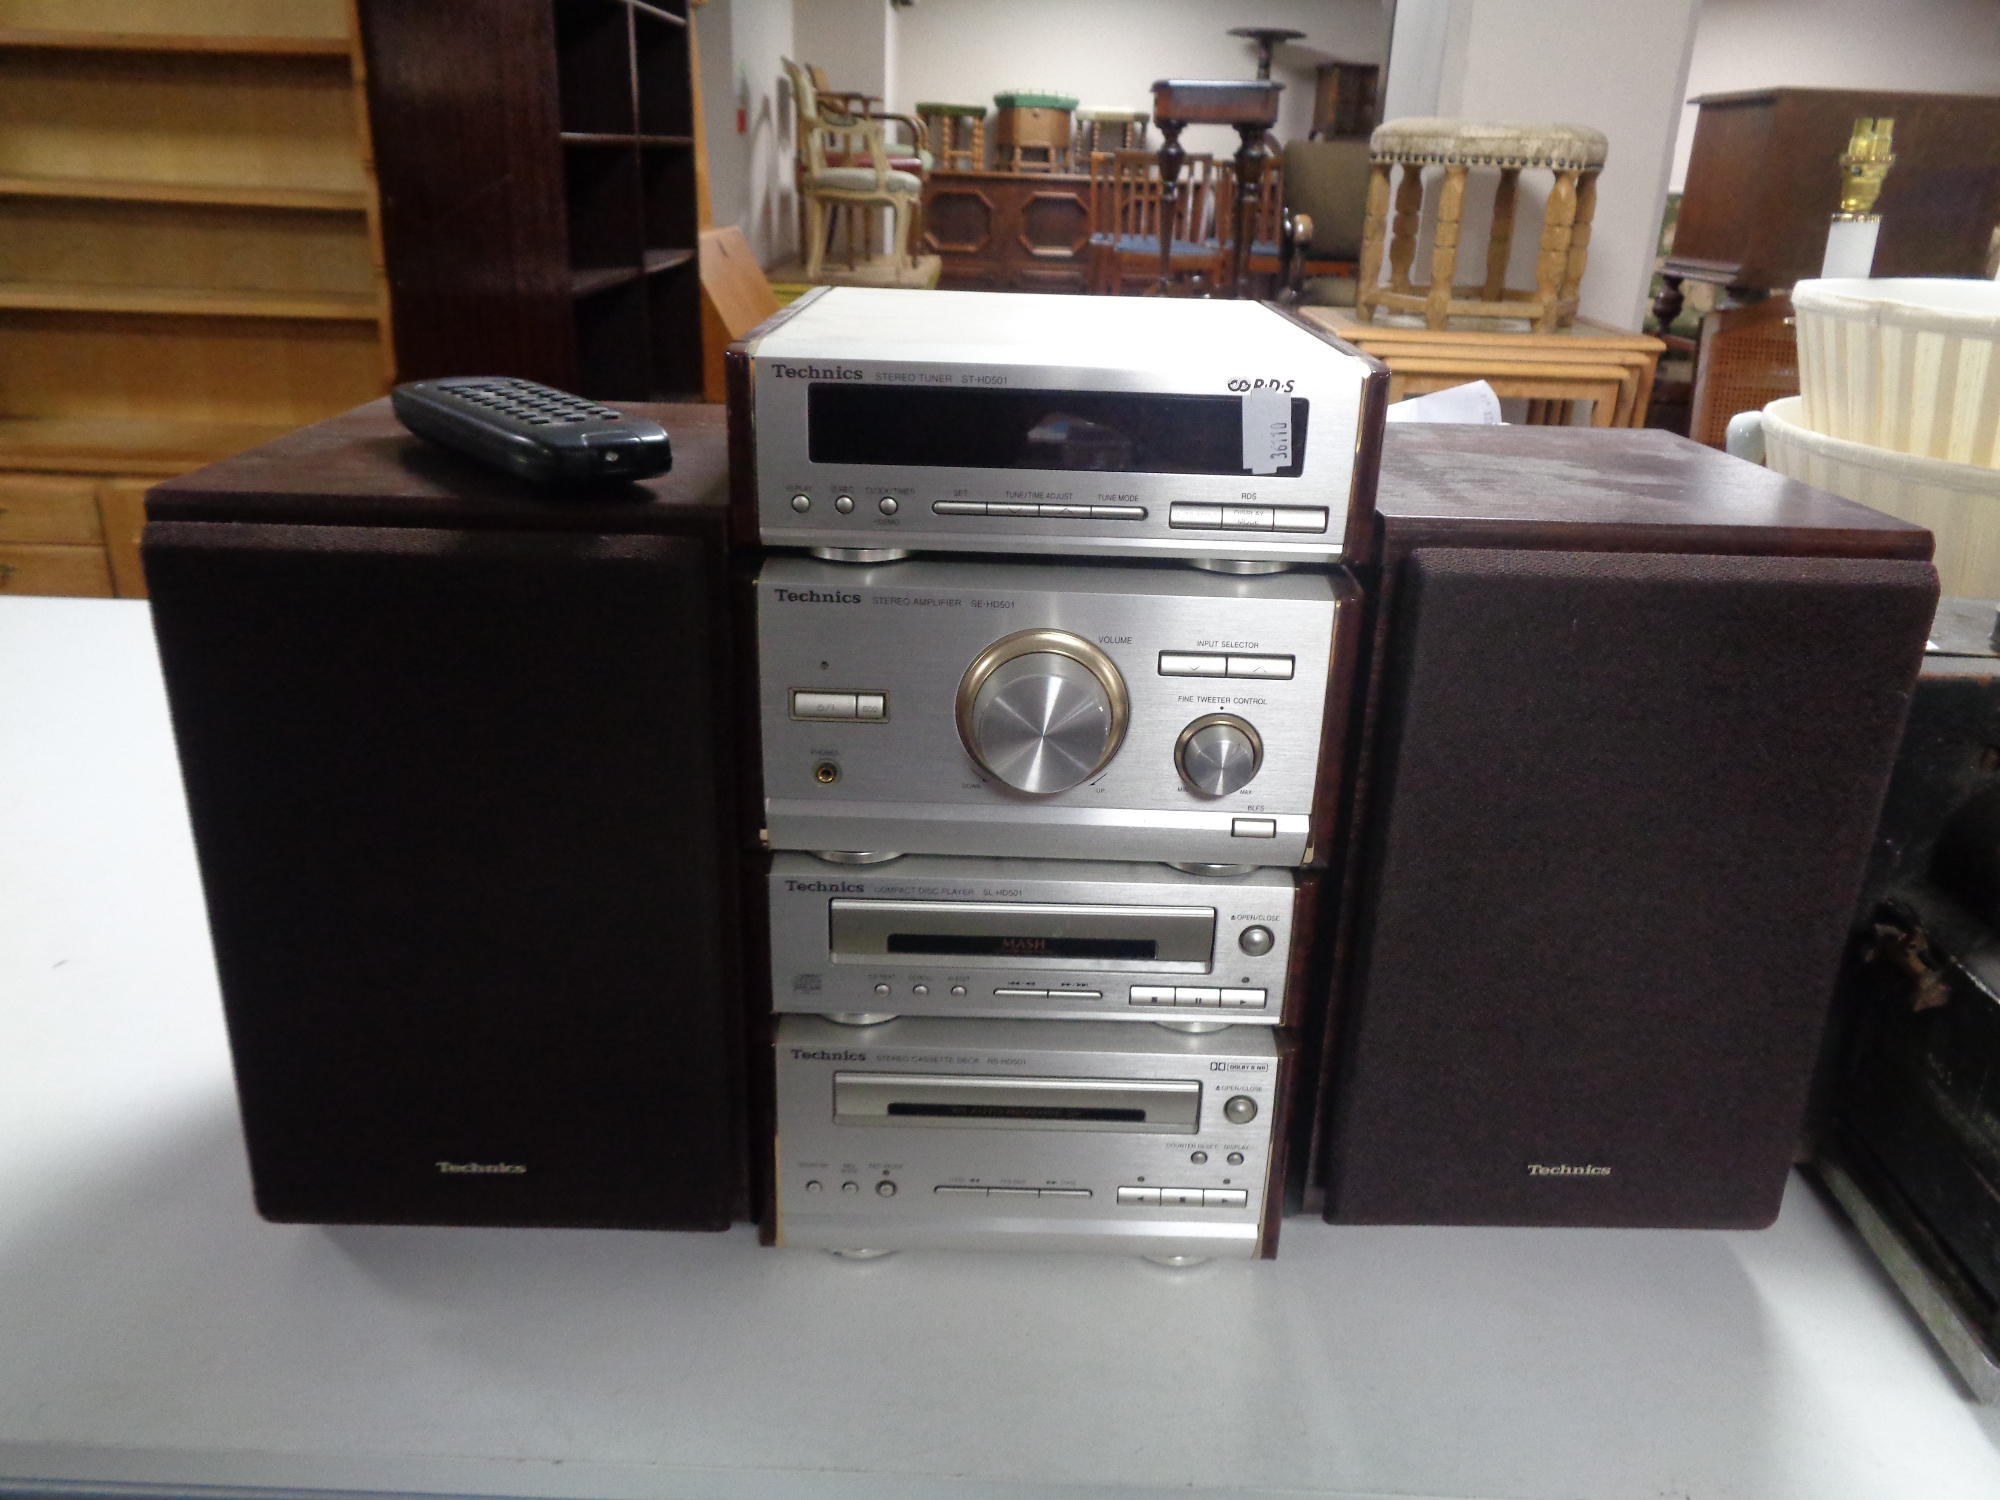 A Technics four piece midi Hi-Fi separates system with speakers and remote.